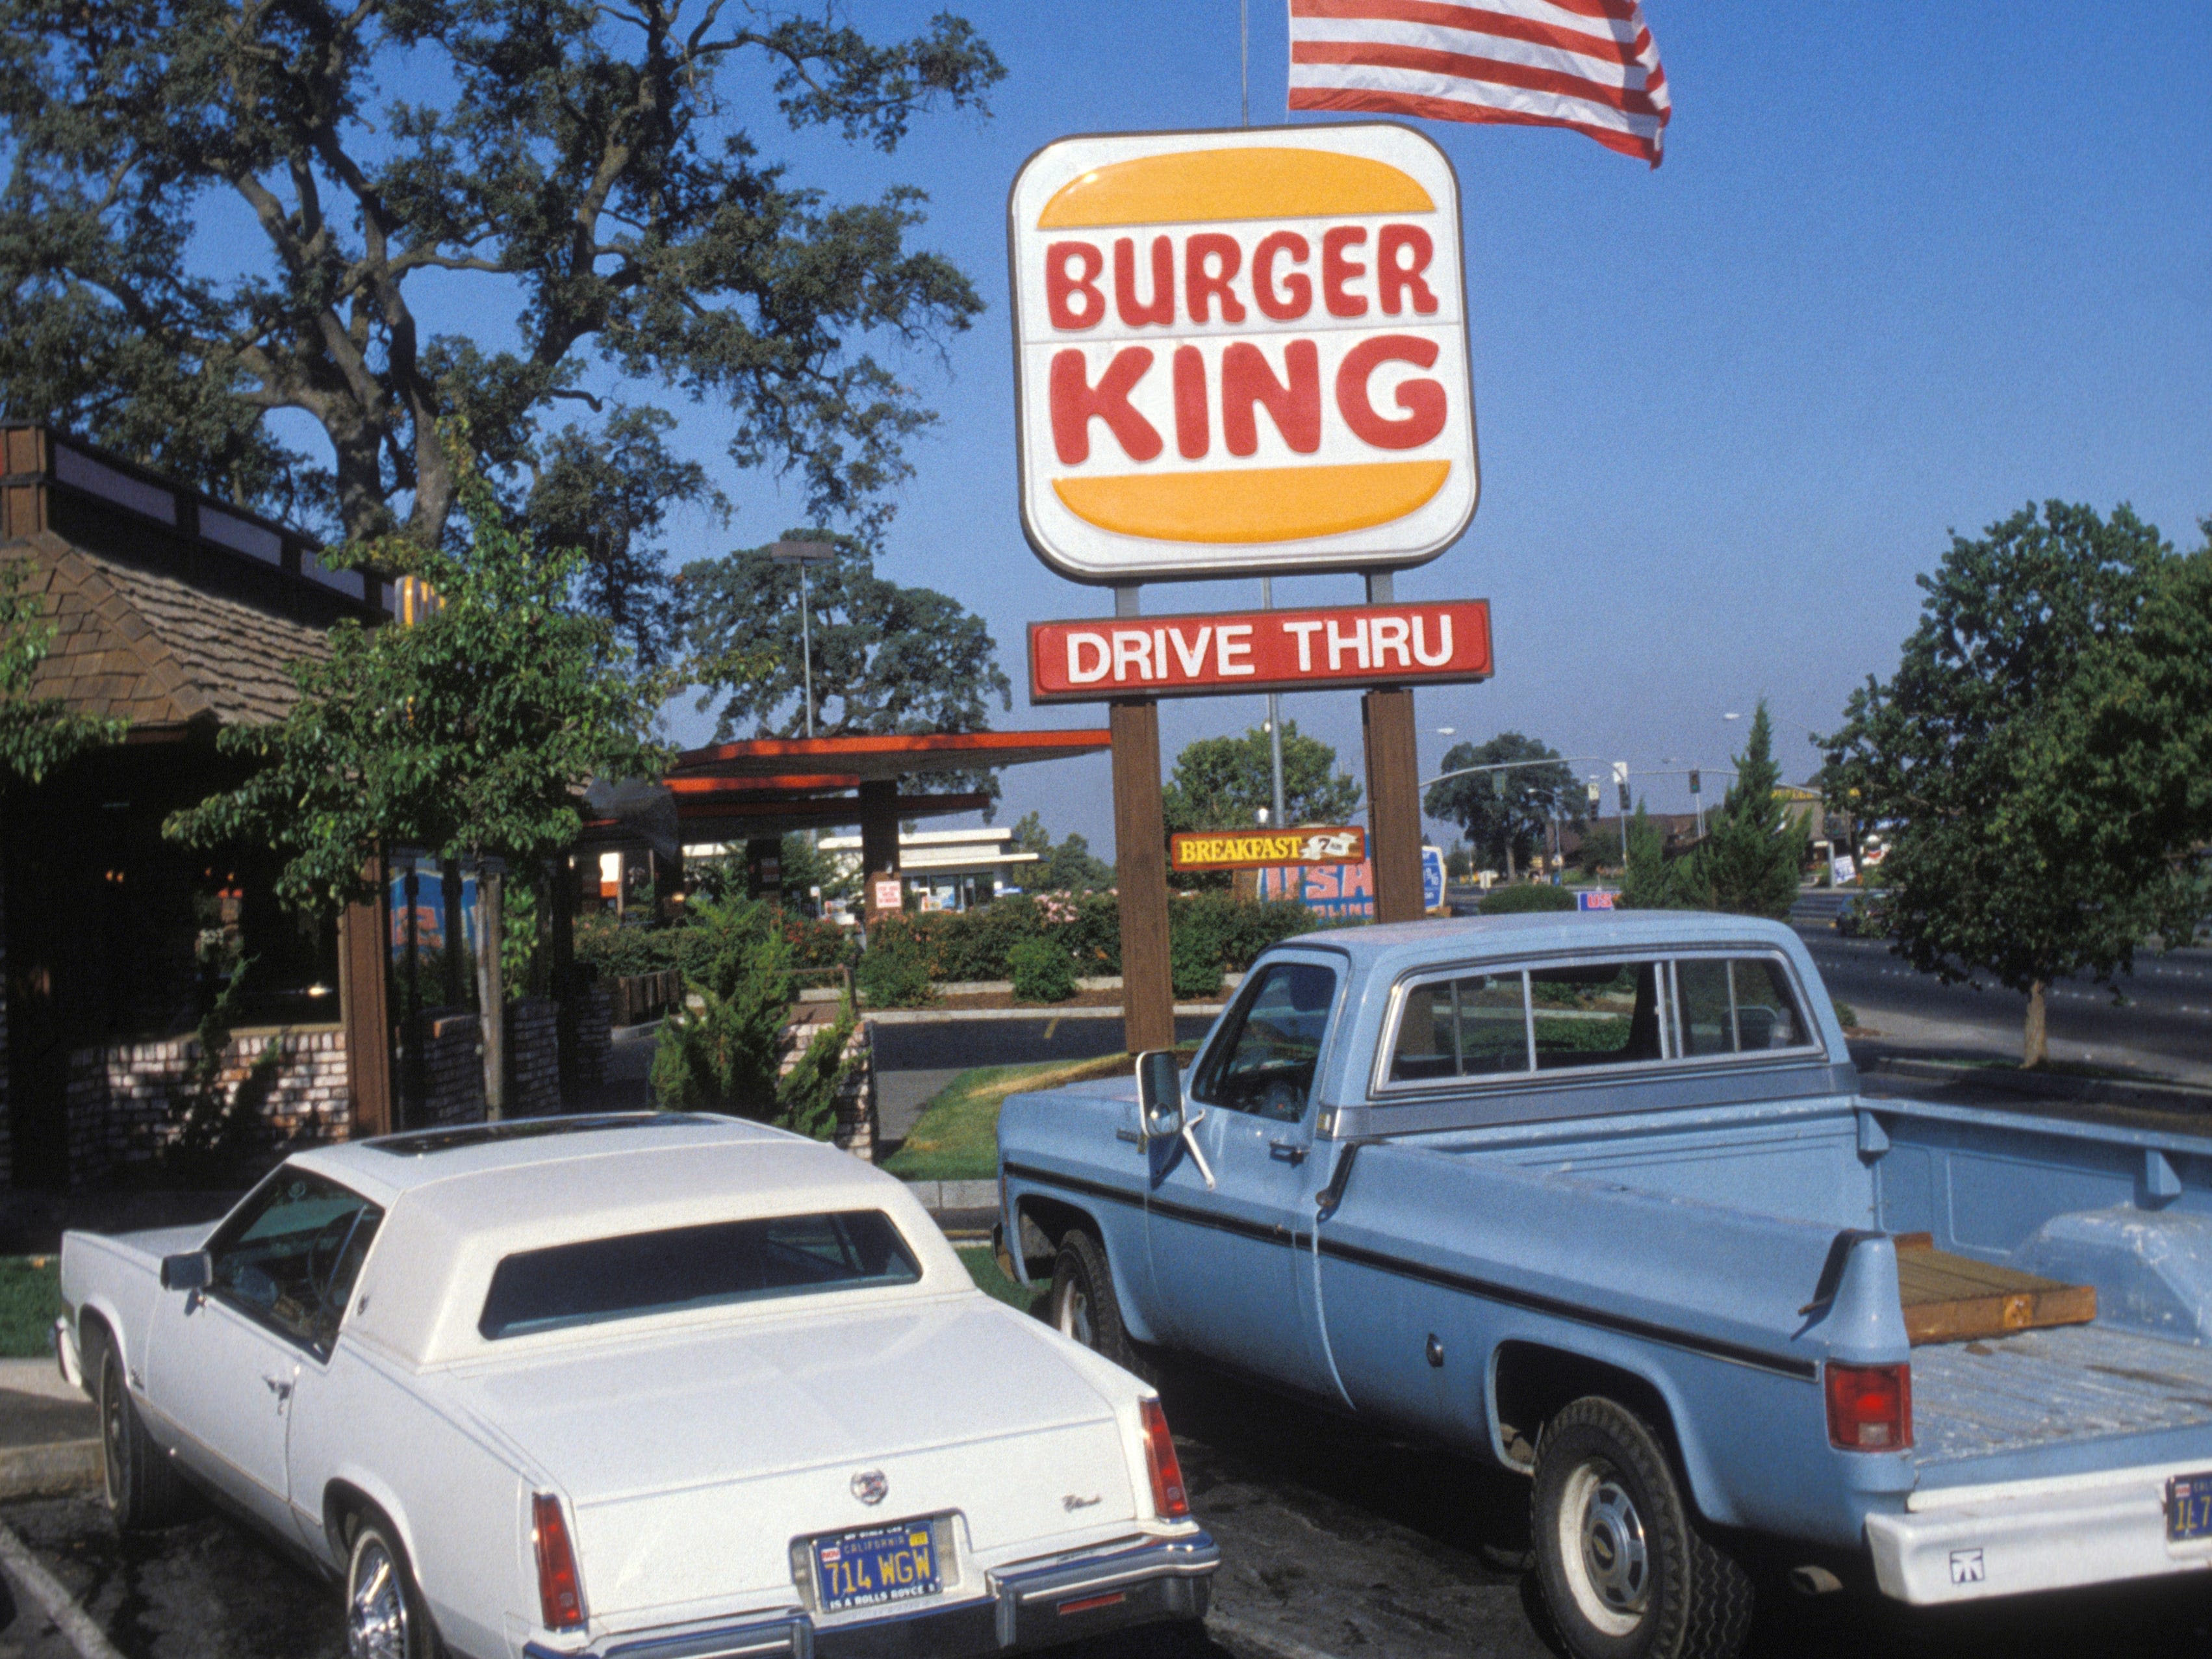 Burger King turns 70 this year. Photos show how the chain has evolved.